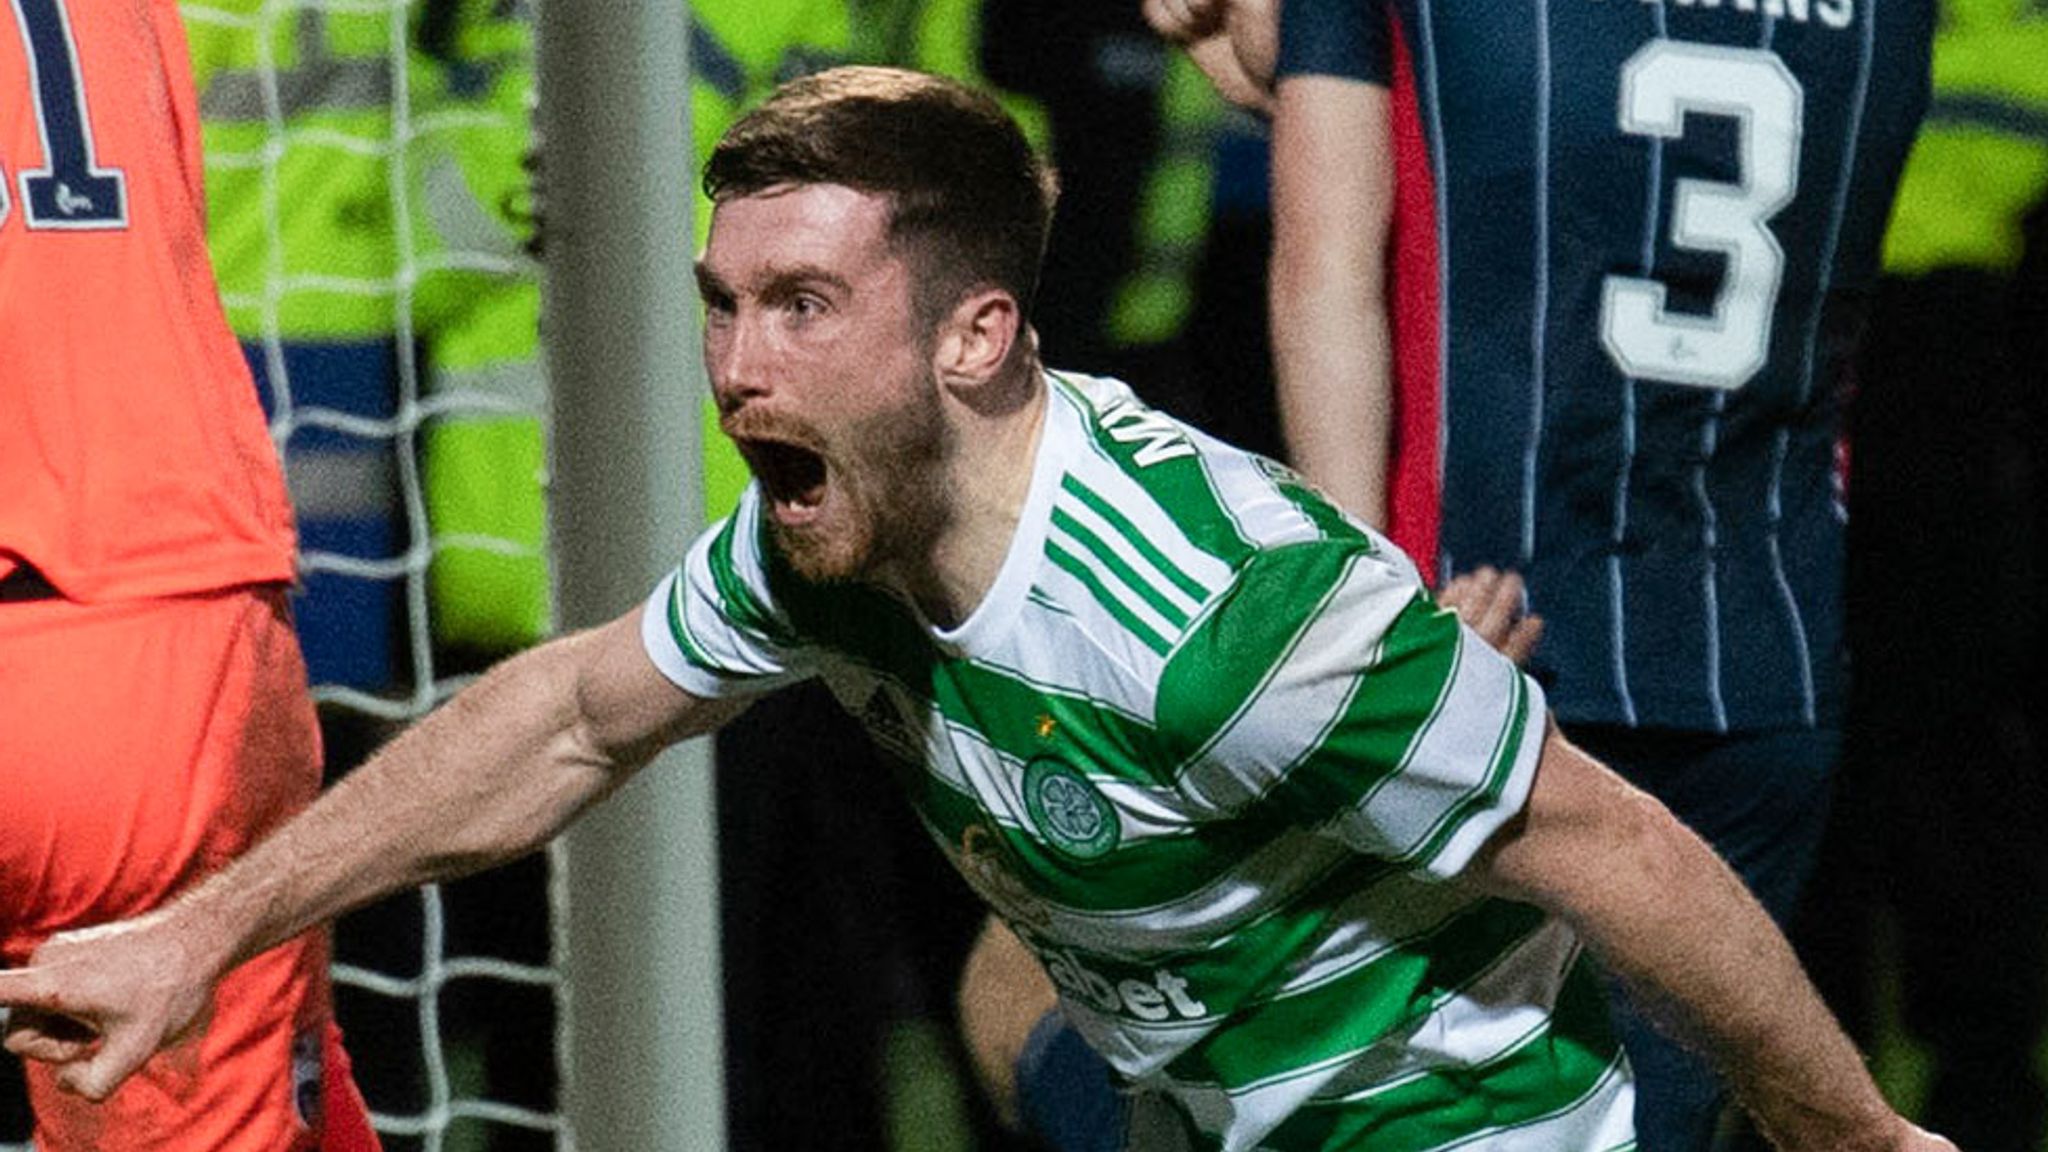 Ross County 1-2 Celtic Anthony Ralston heads 97th-minute winner for 10-man Hoops in Dingwall Football News Sky Sports